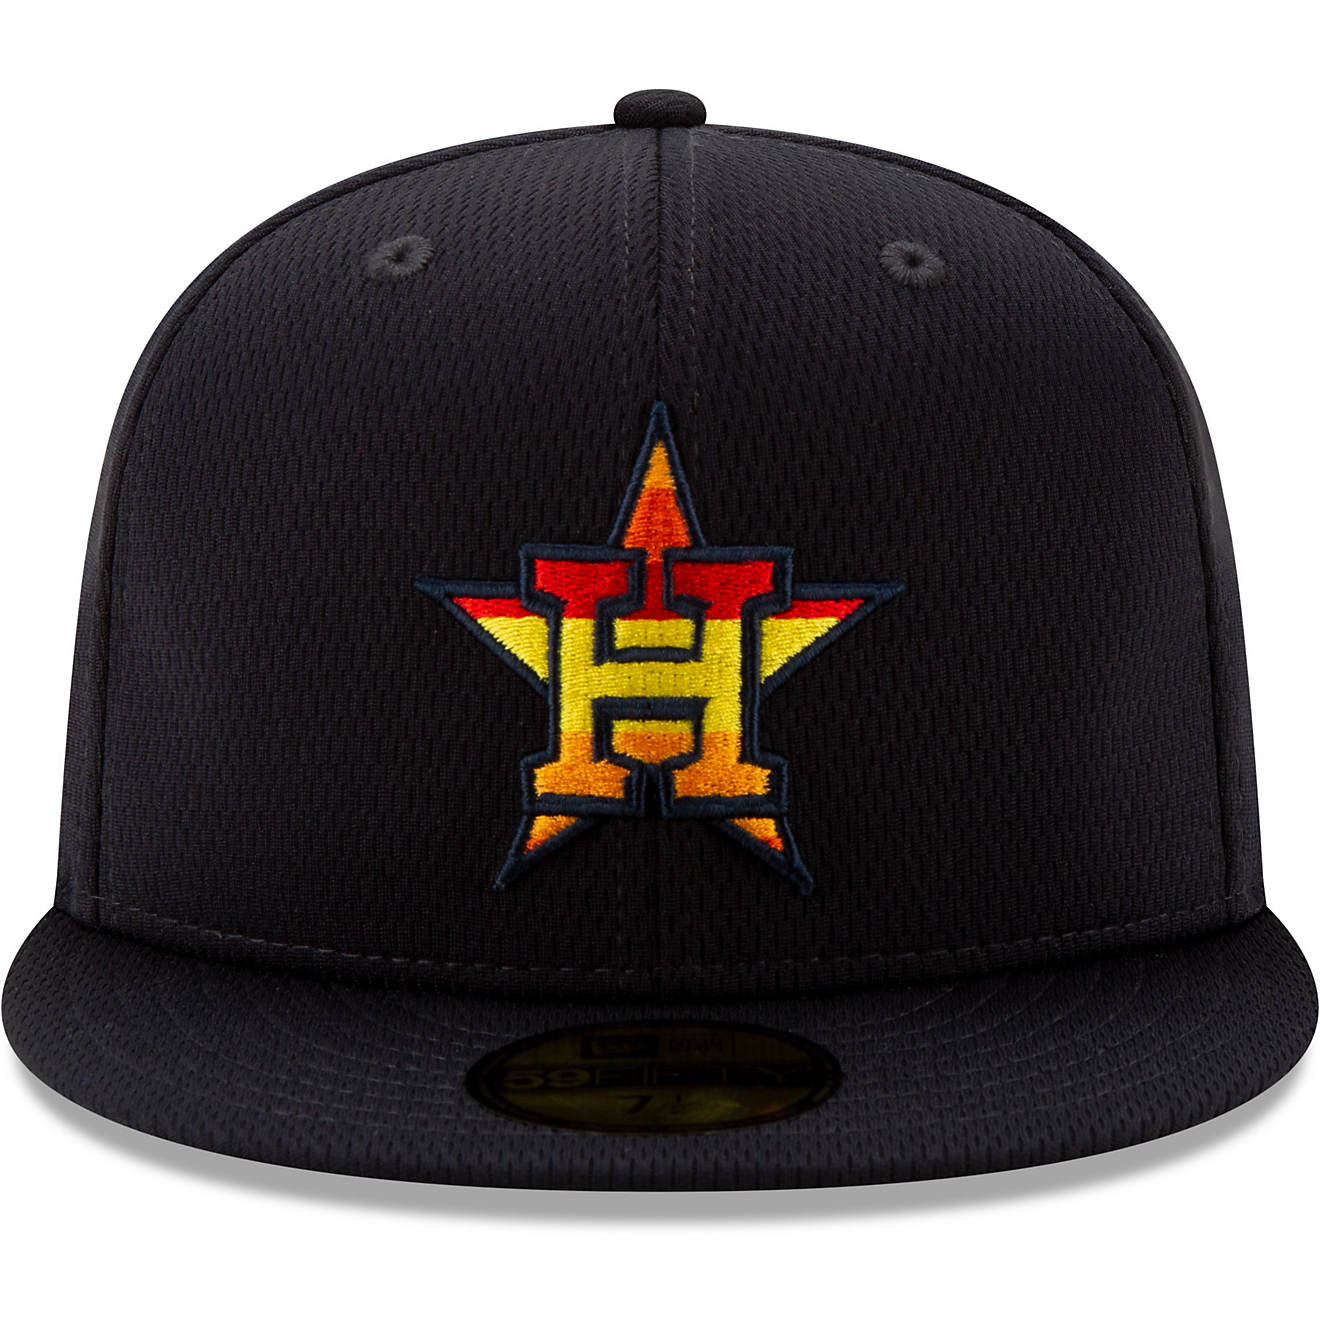 New Era Men's Houston Astros 59FIFTY On-Field Batting Practice Ball Cap                                                          - view number 1